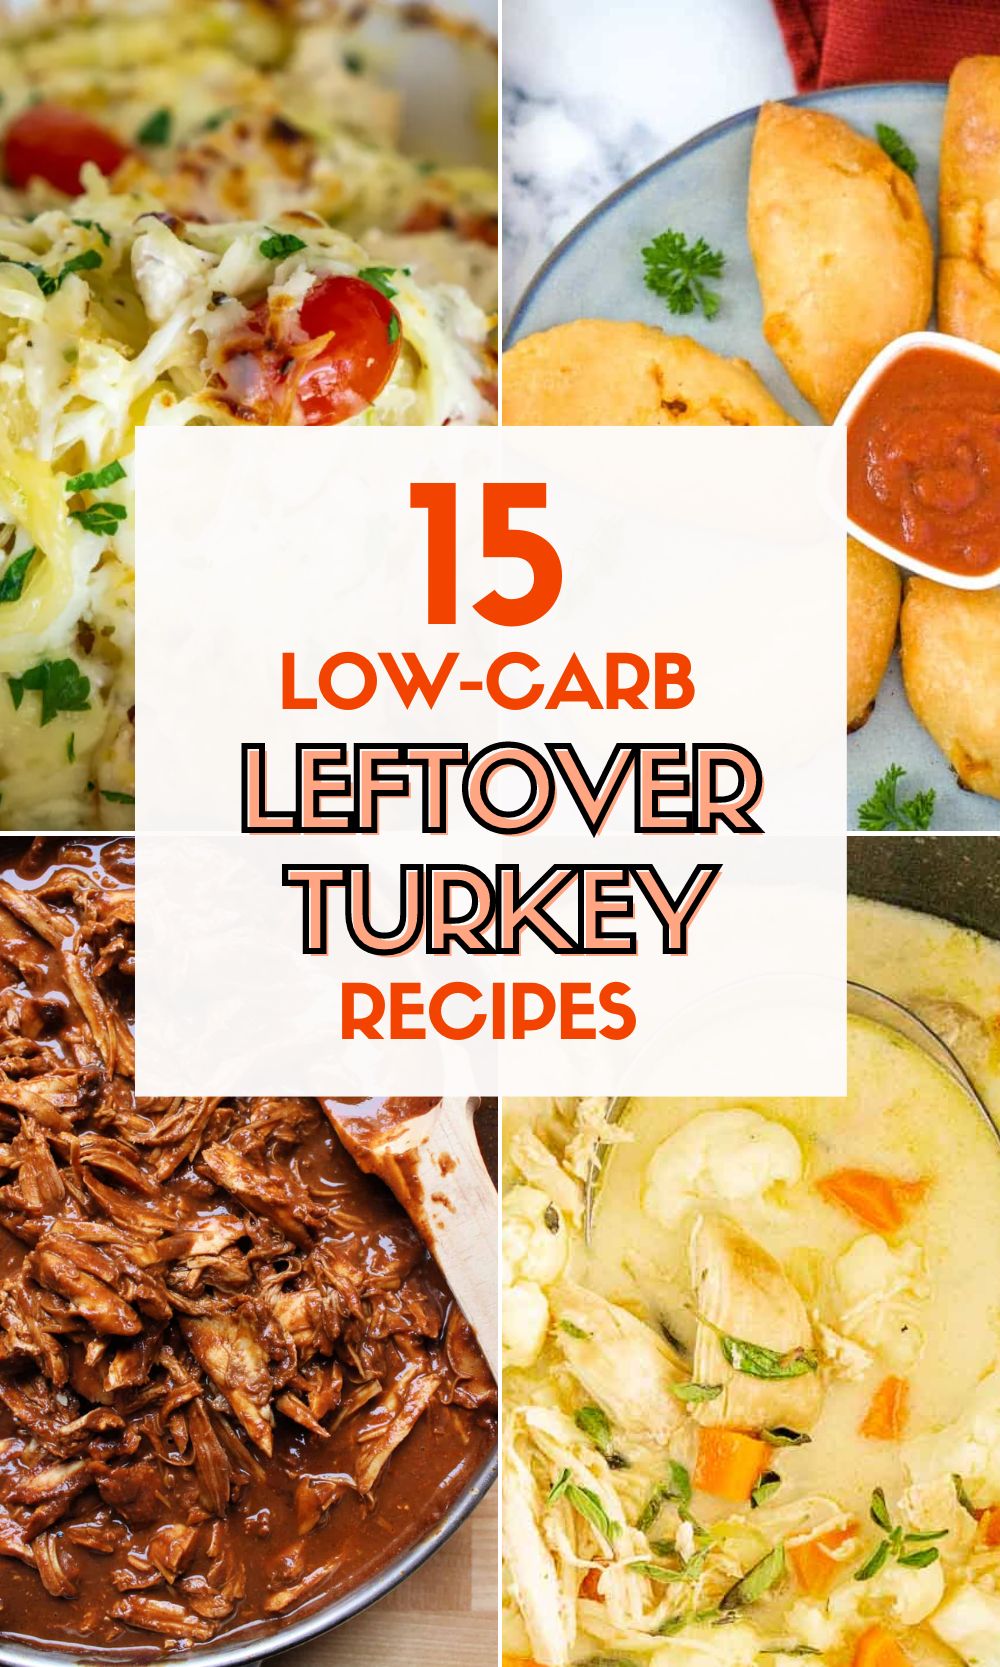 Pinterest image with text: 15 low carb leftover turkey recipes